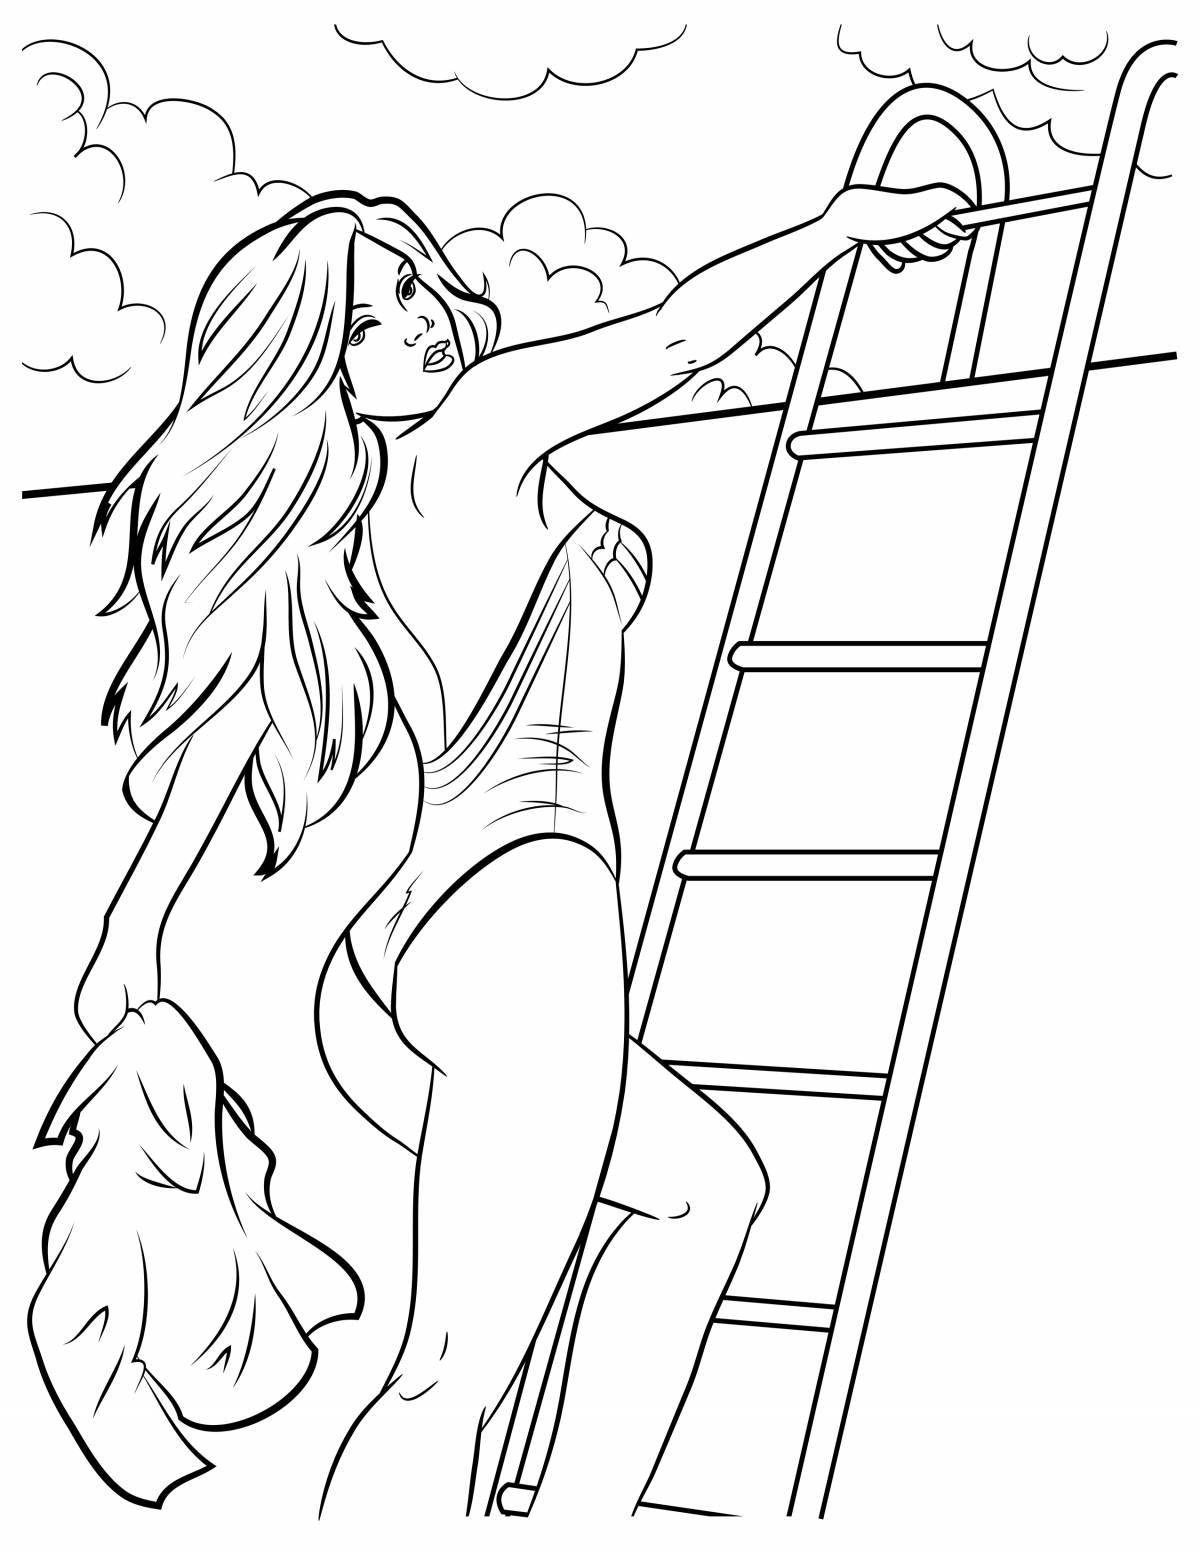 Intense coloring page 18 vulgar on android